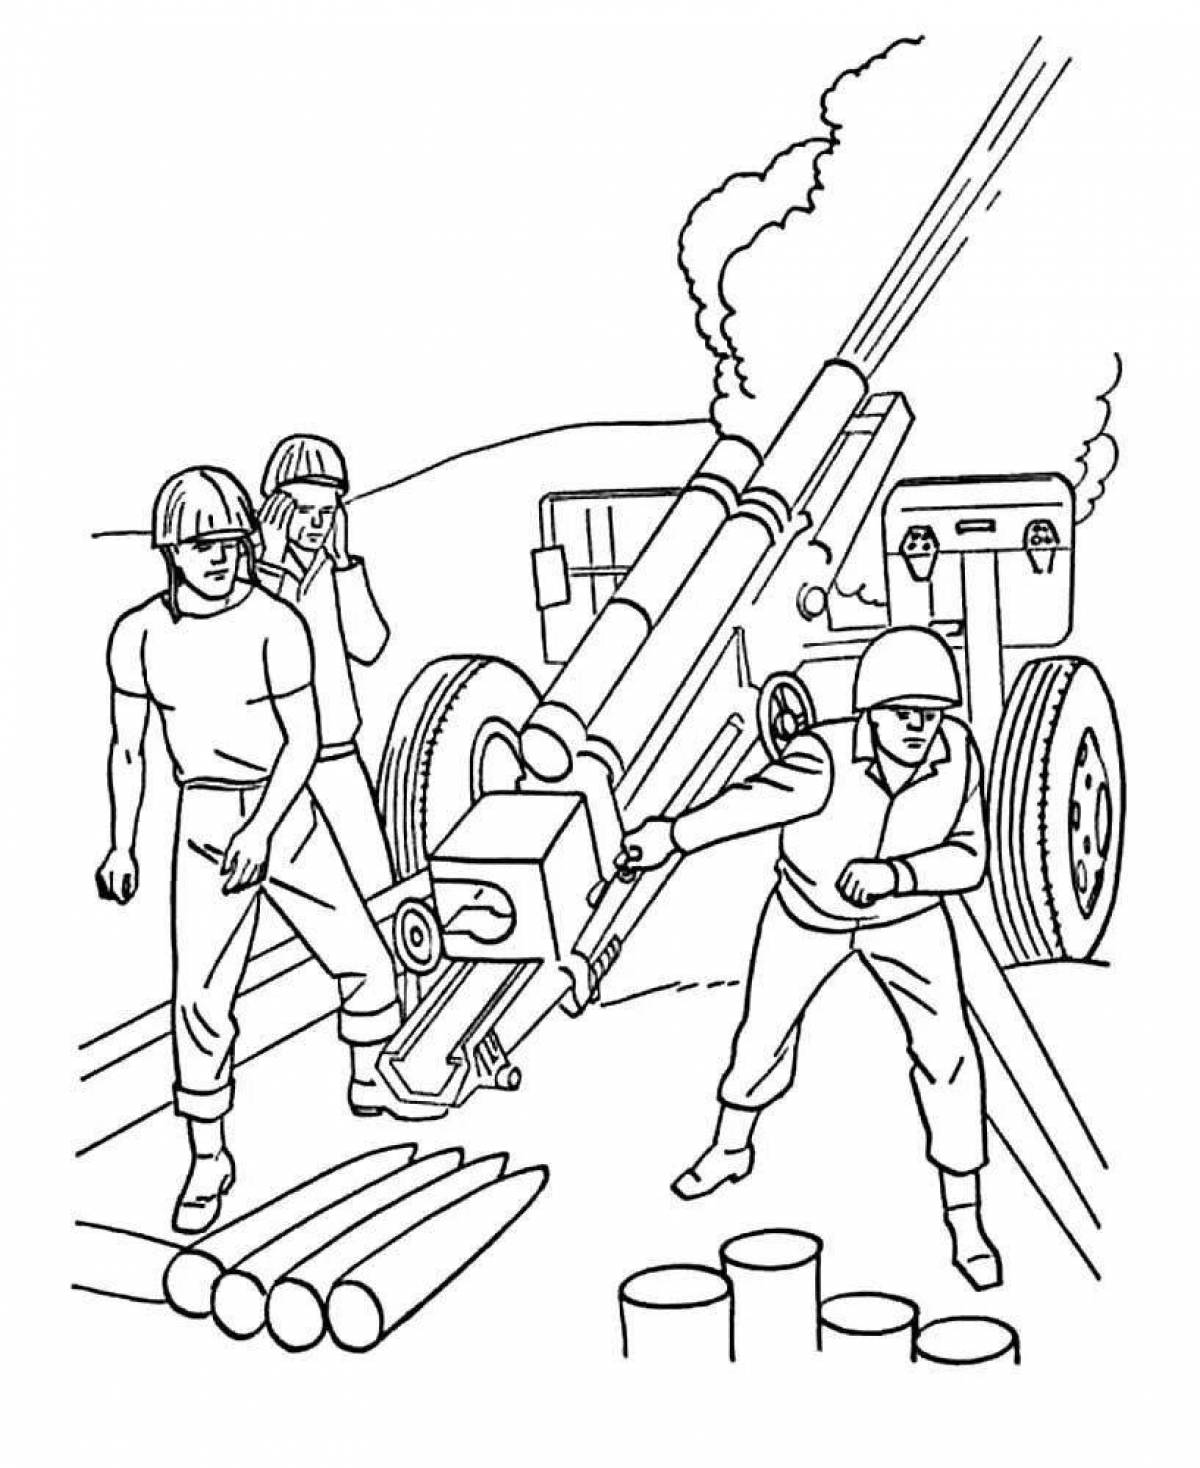 Coloring book fearless fighters in war